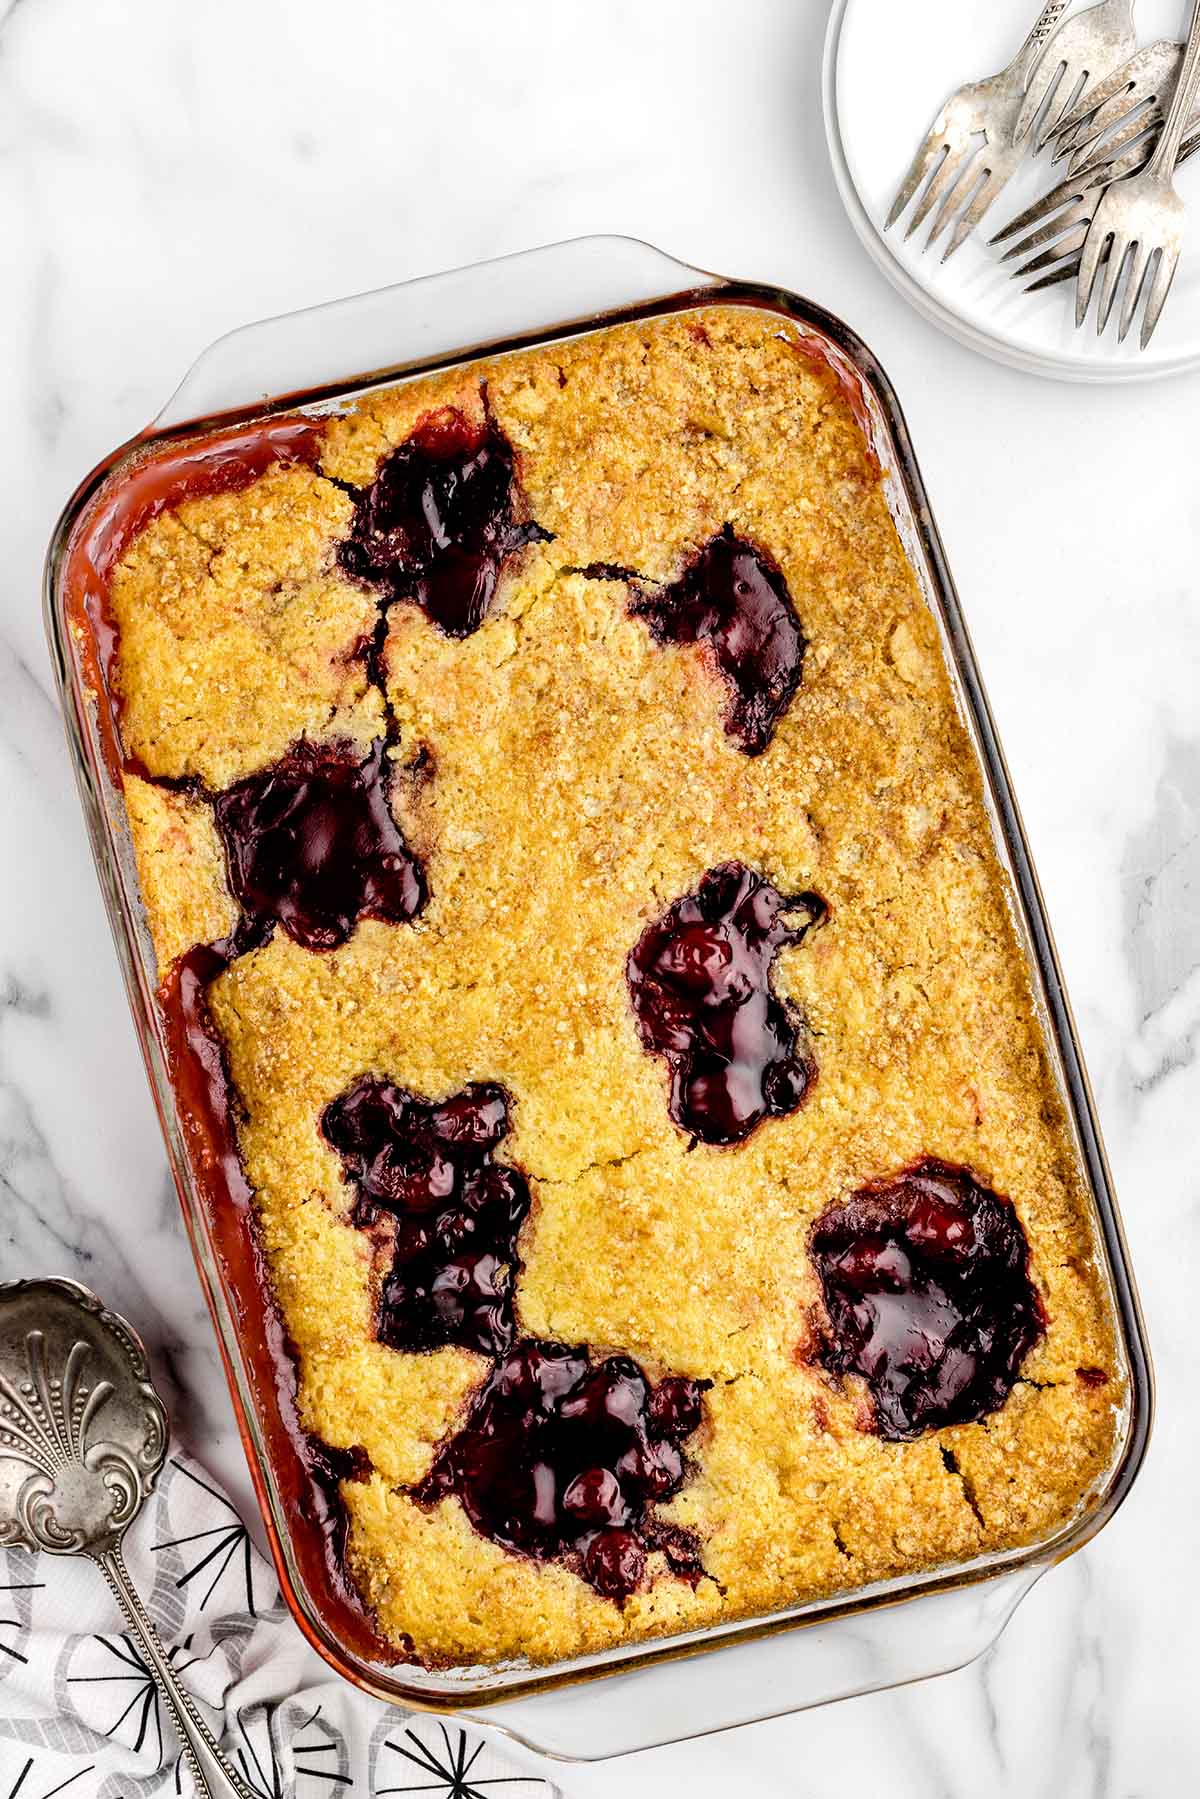 7up Cherry Cobbler in a baking dish